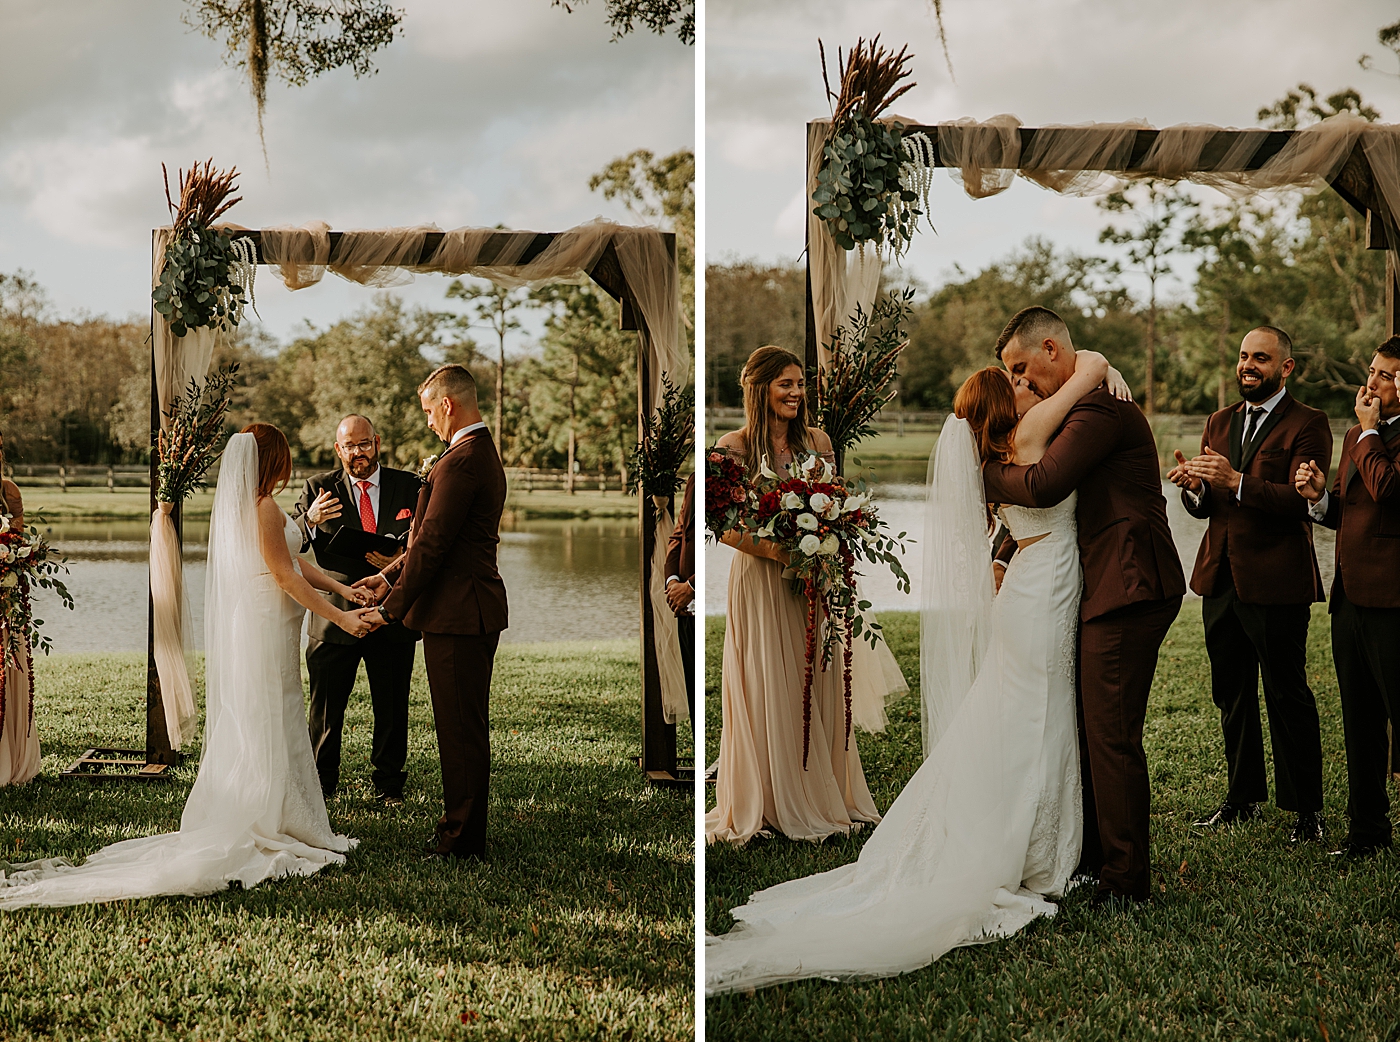 Just married kiss Bride entering ceremony with father BMR Stables Wedding Photography captured by South Florida Wedding Photographer Maggie Alvarez Photography